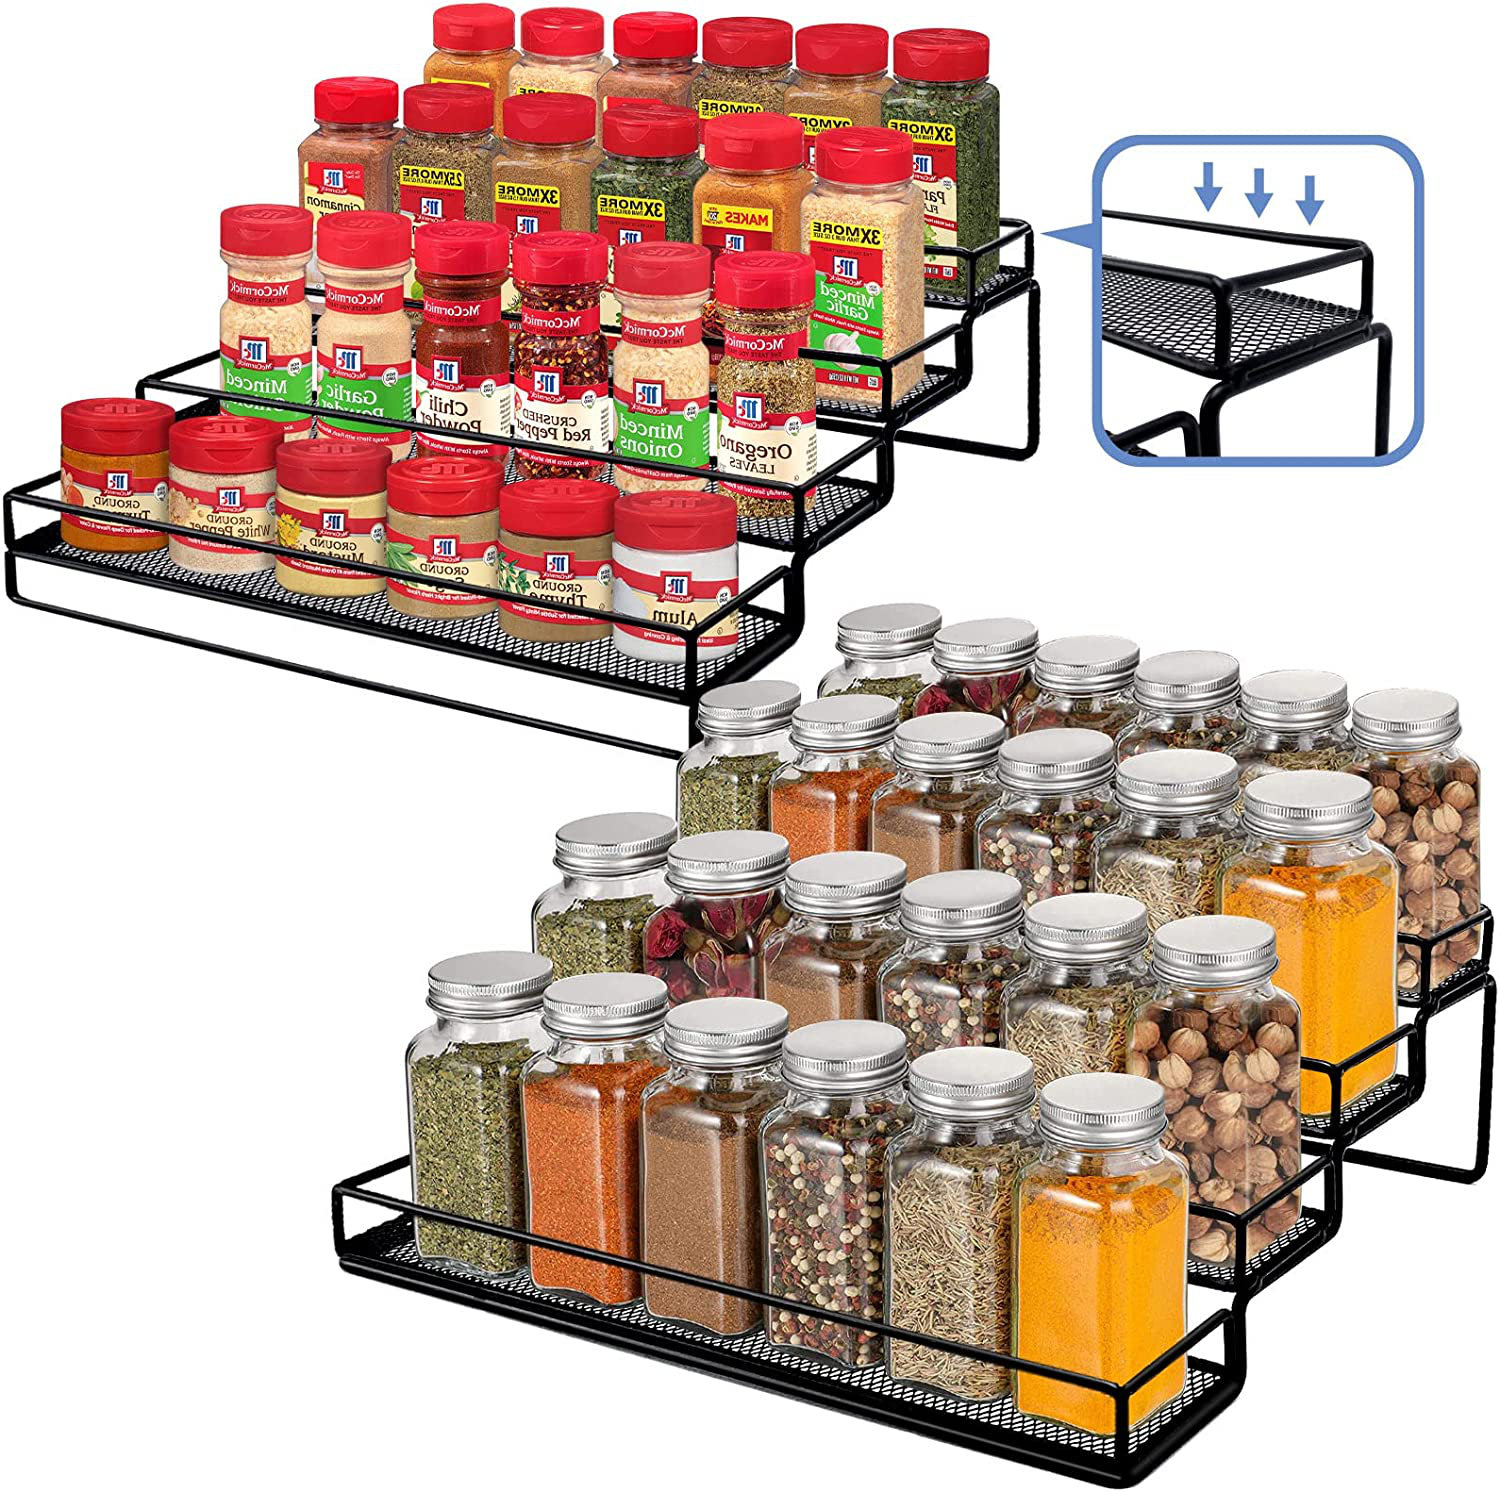 3-tier Bamboo Spice Rack Kitchen Organizer Sturdy Adjustable Shelf,spices  Bamboo Tiered Rack Spice Organizer for Counter Cabinets 